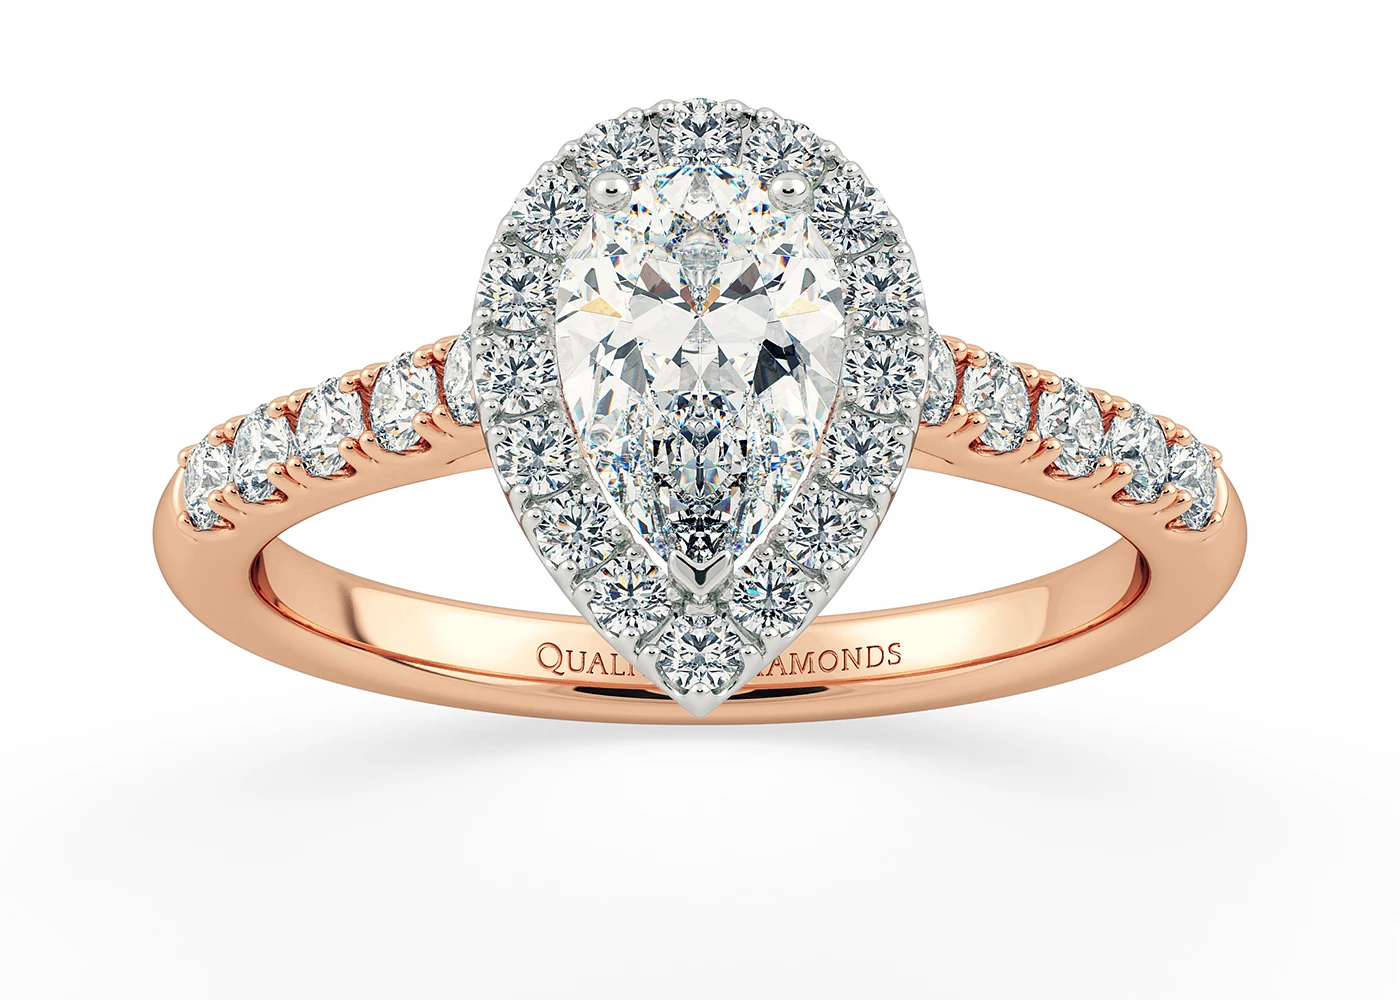 One Carat Pear Halo Diamond Ring in 18K Rose Gold